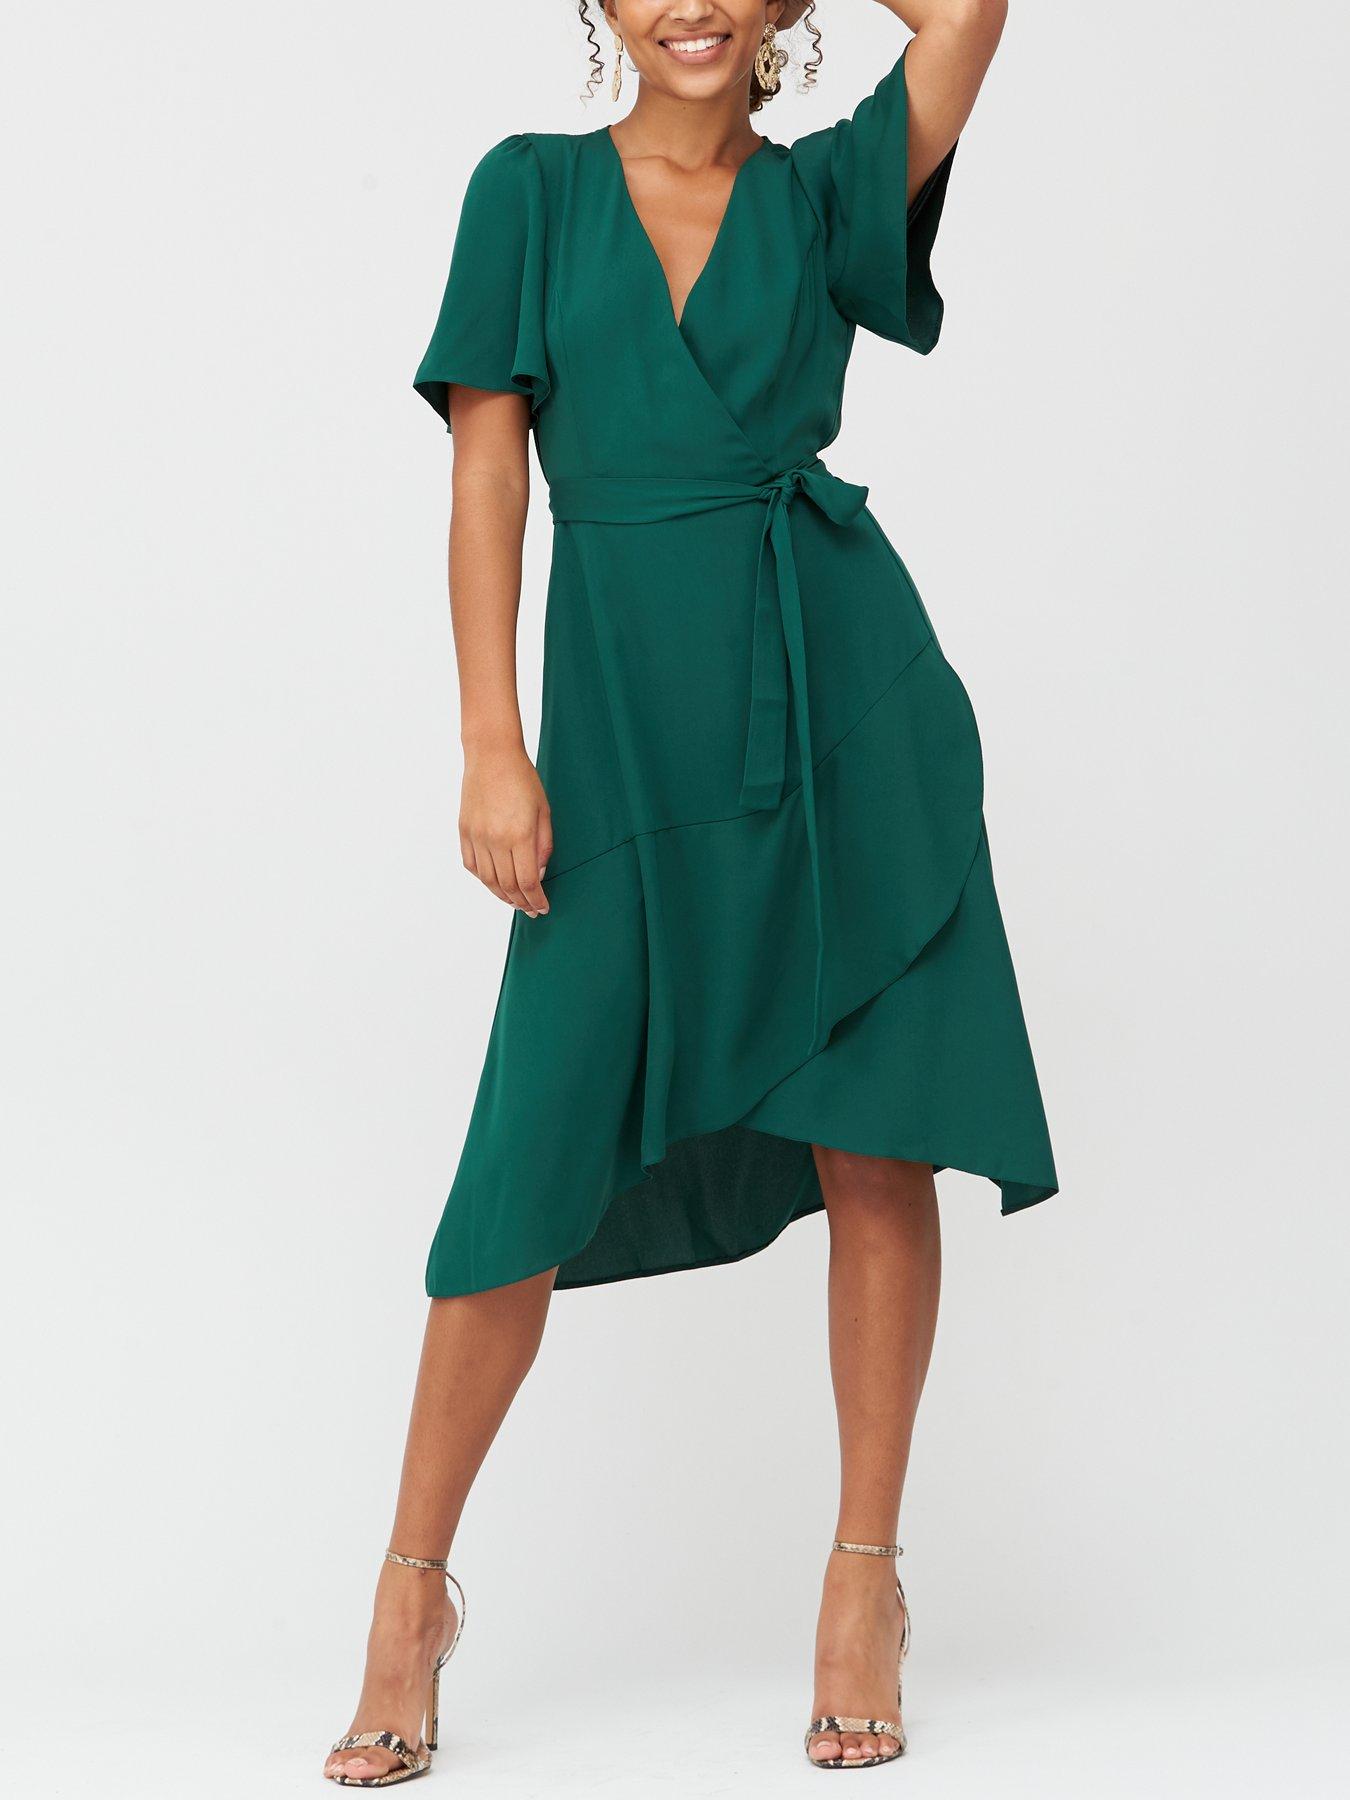 womens green party dress